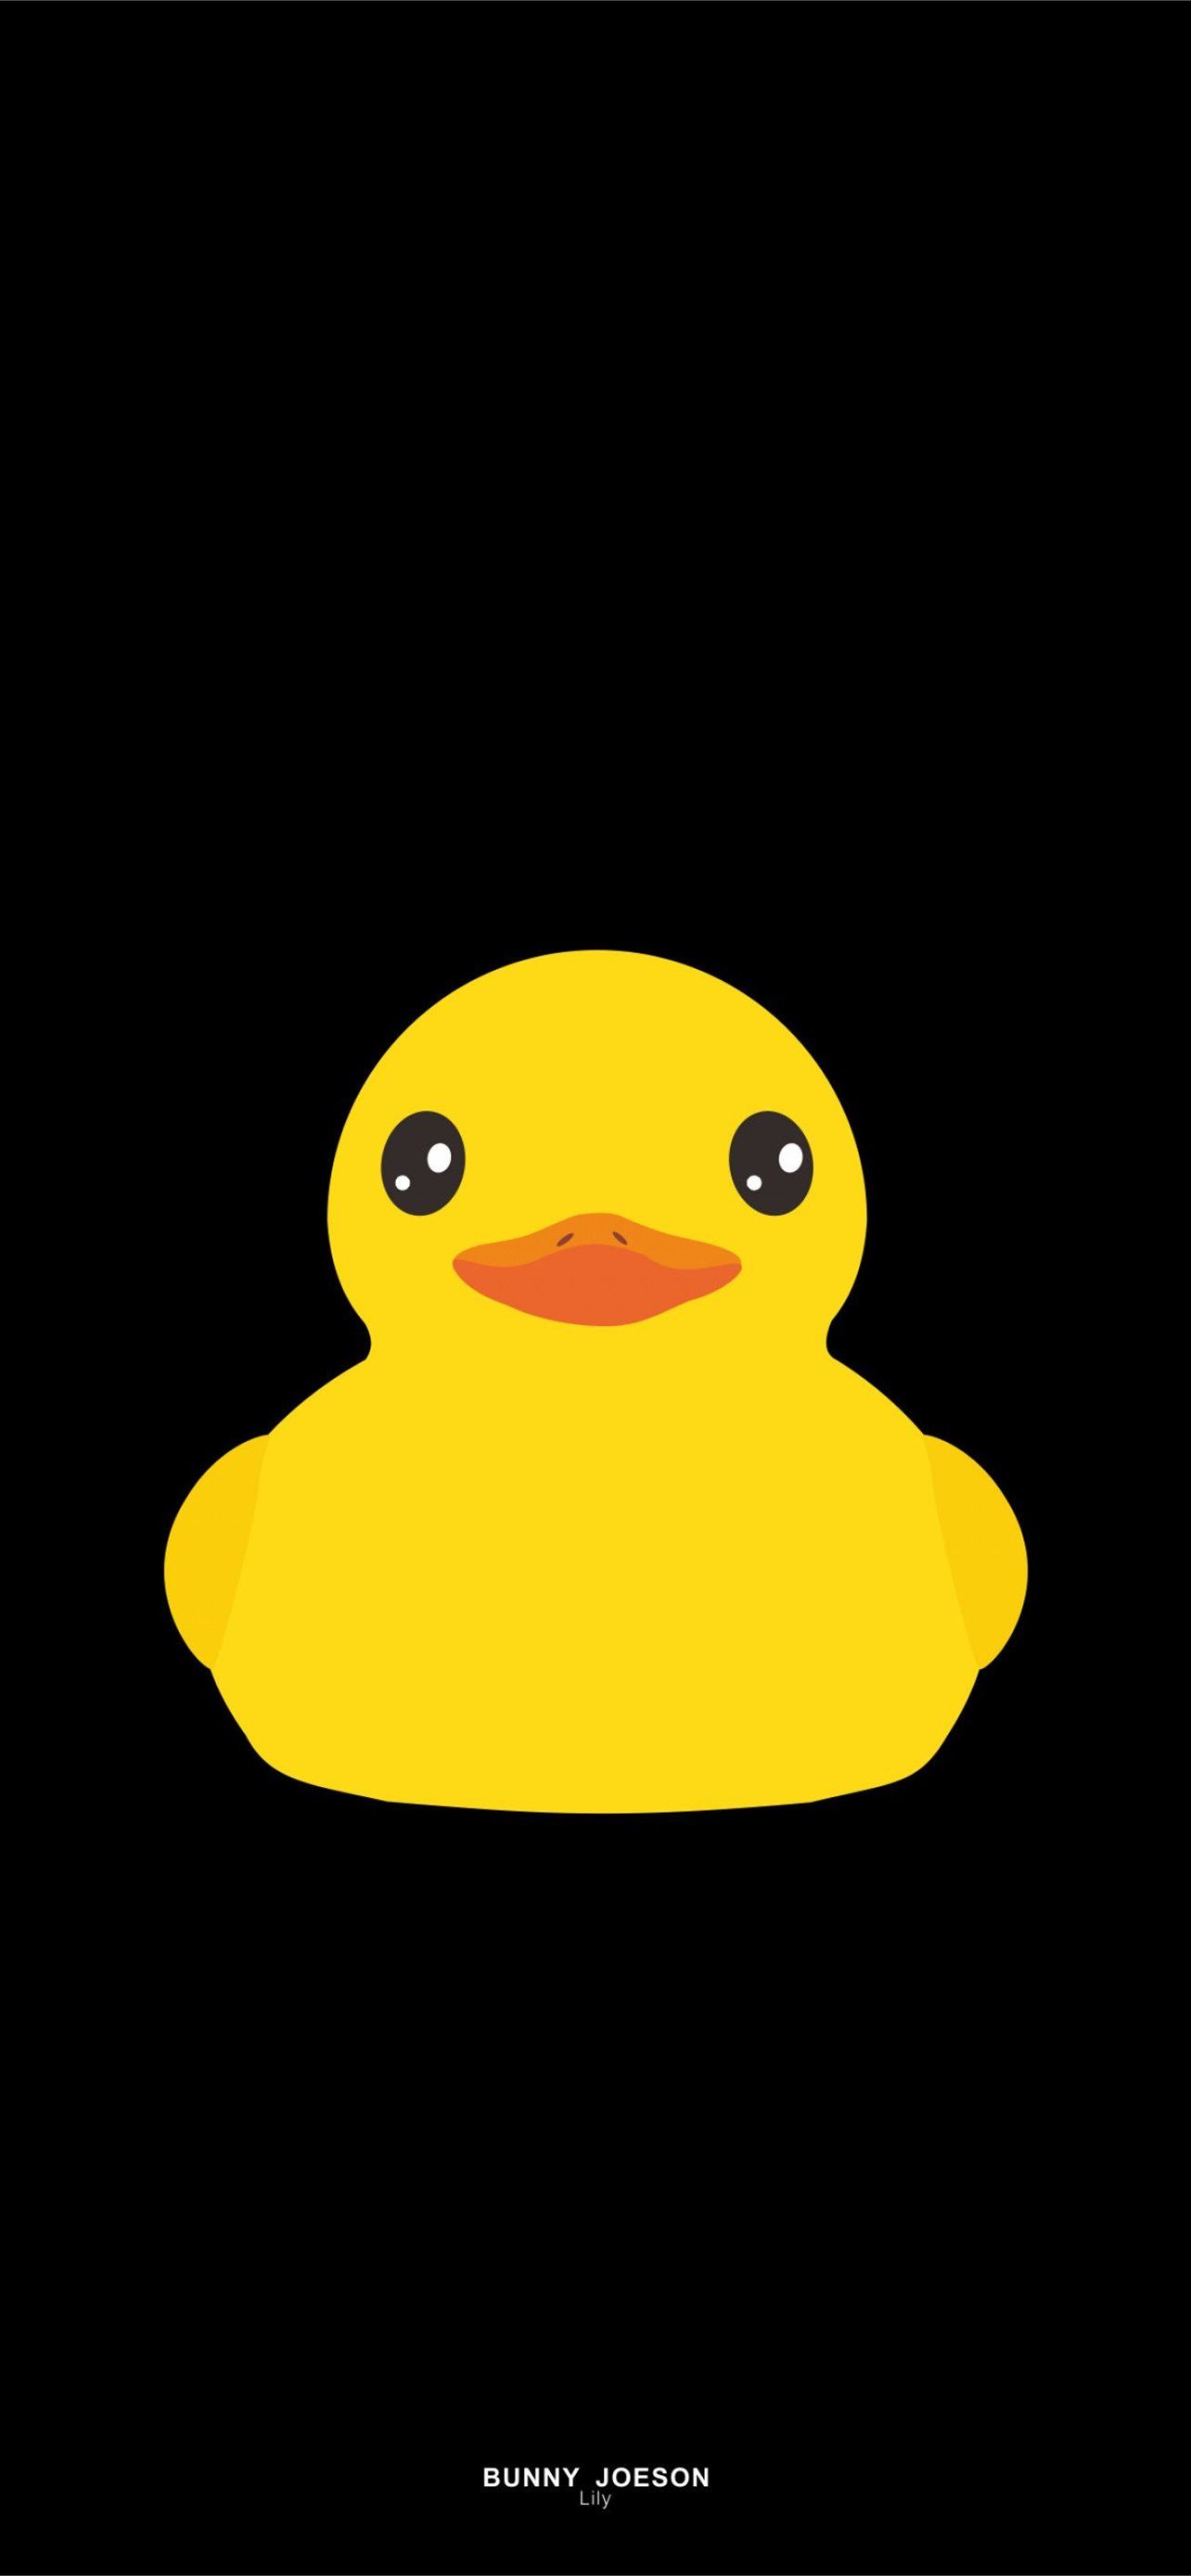 A yellow duck with black background and white eyes - Duck